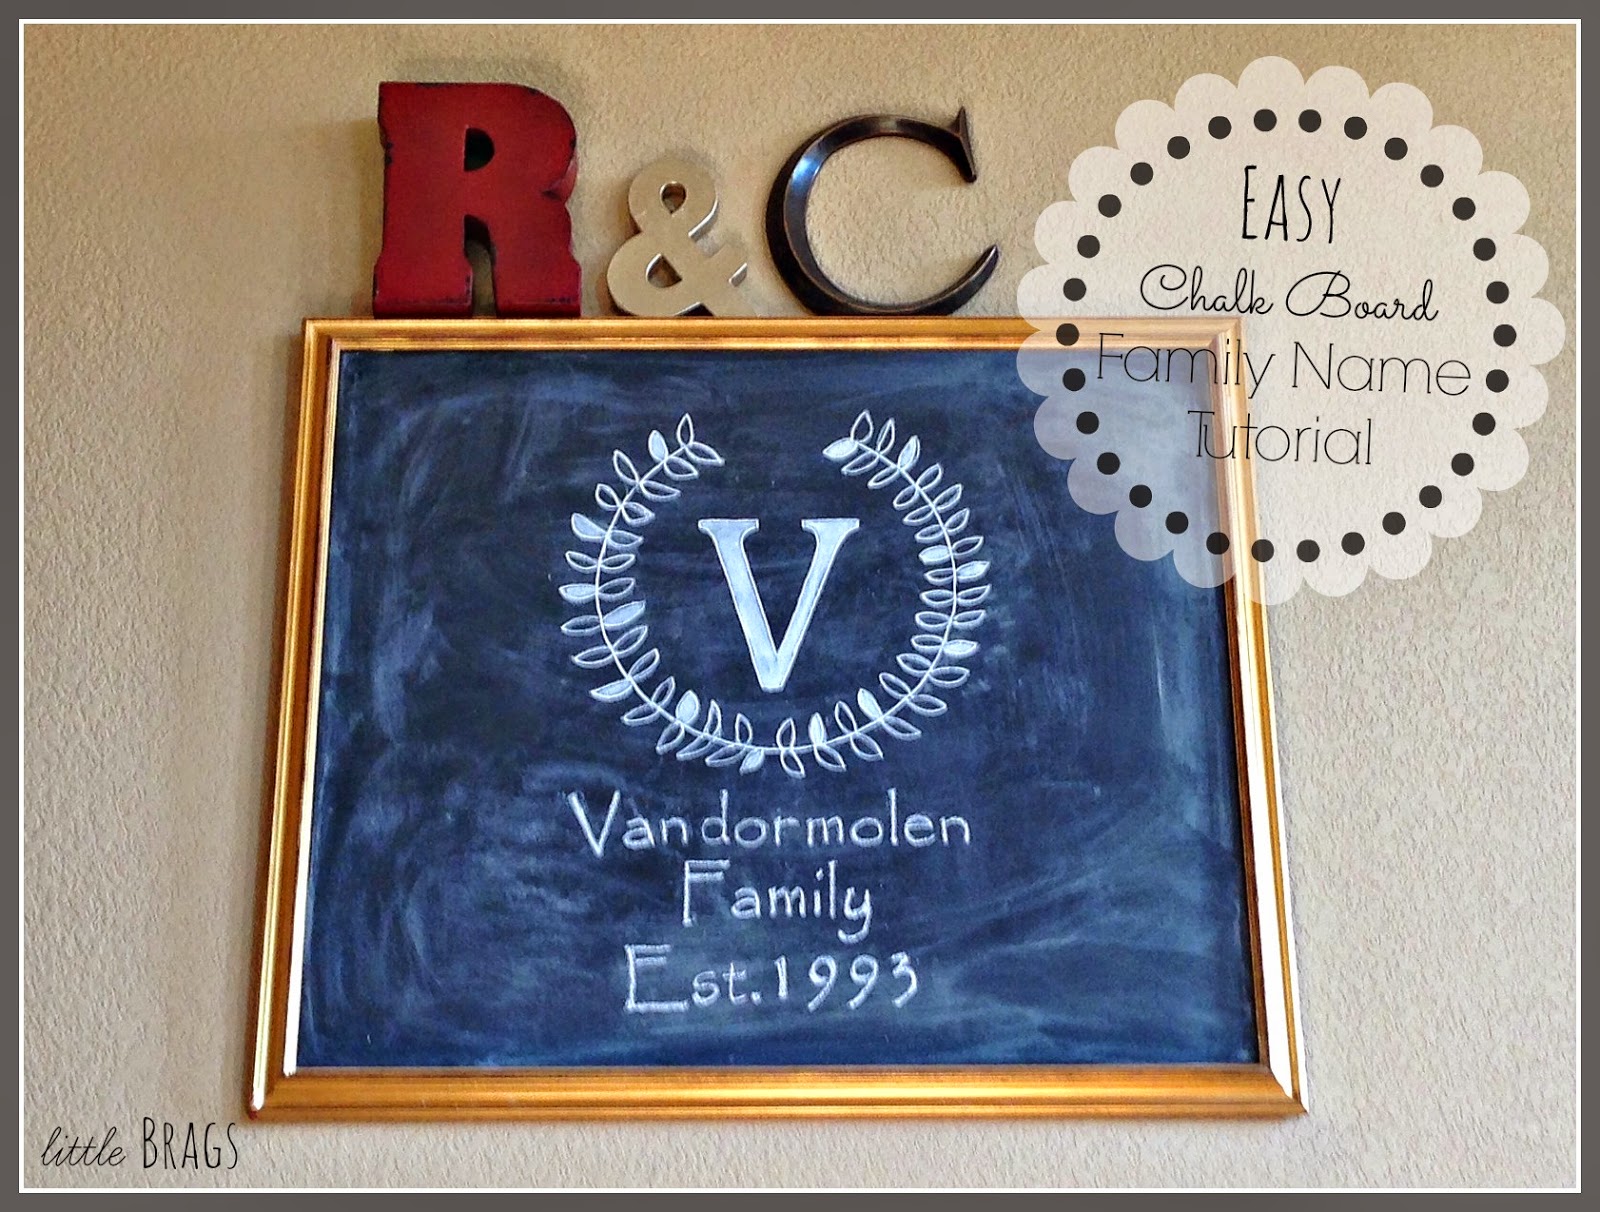 Using a chalkboard marker, trace and fill in the design.  Chalkboard  writing, Chalkboard signs, Chalkboard lettering